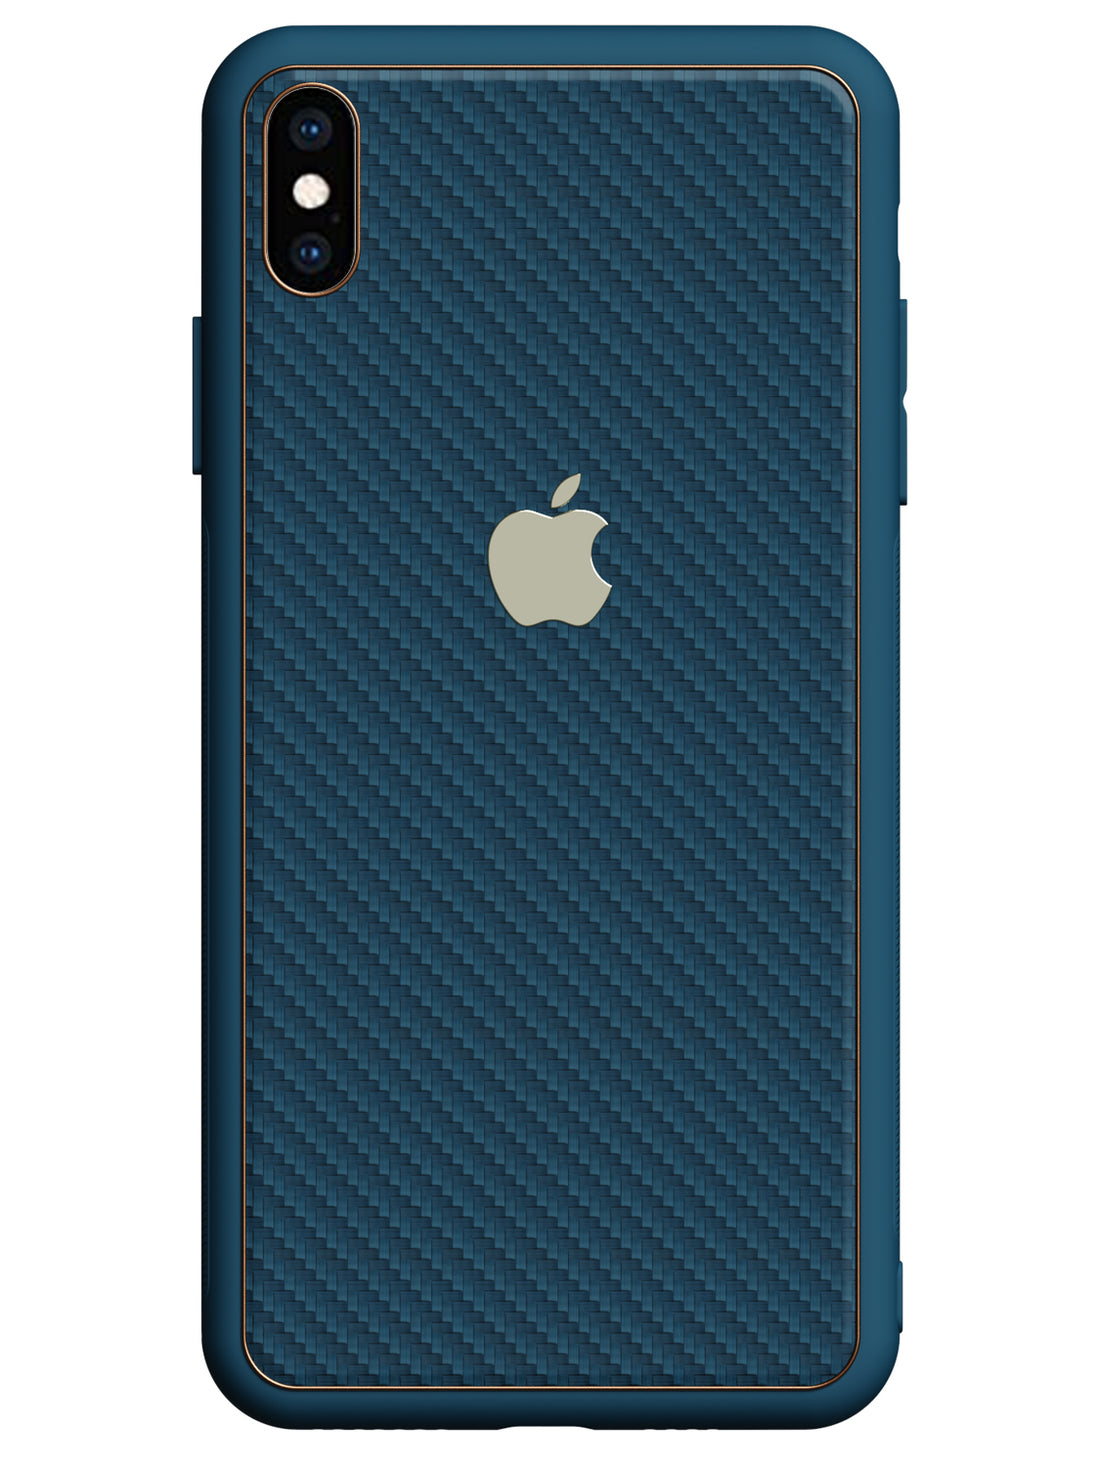 Carbon Leather Chrome Case - iPhone XS Max (Navy Blue)